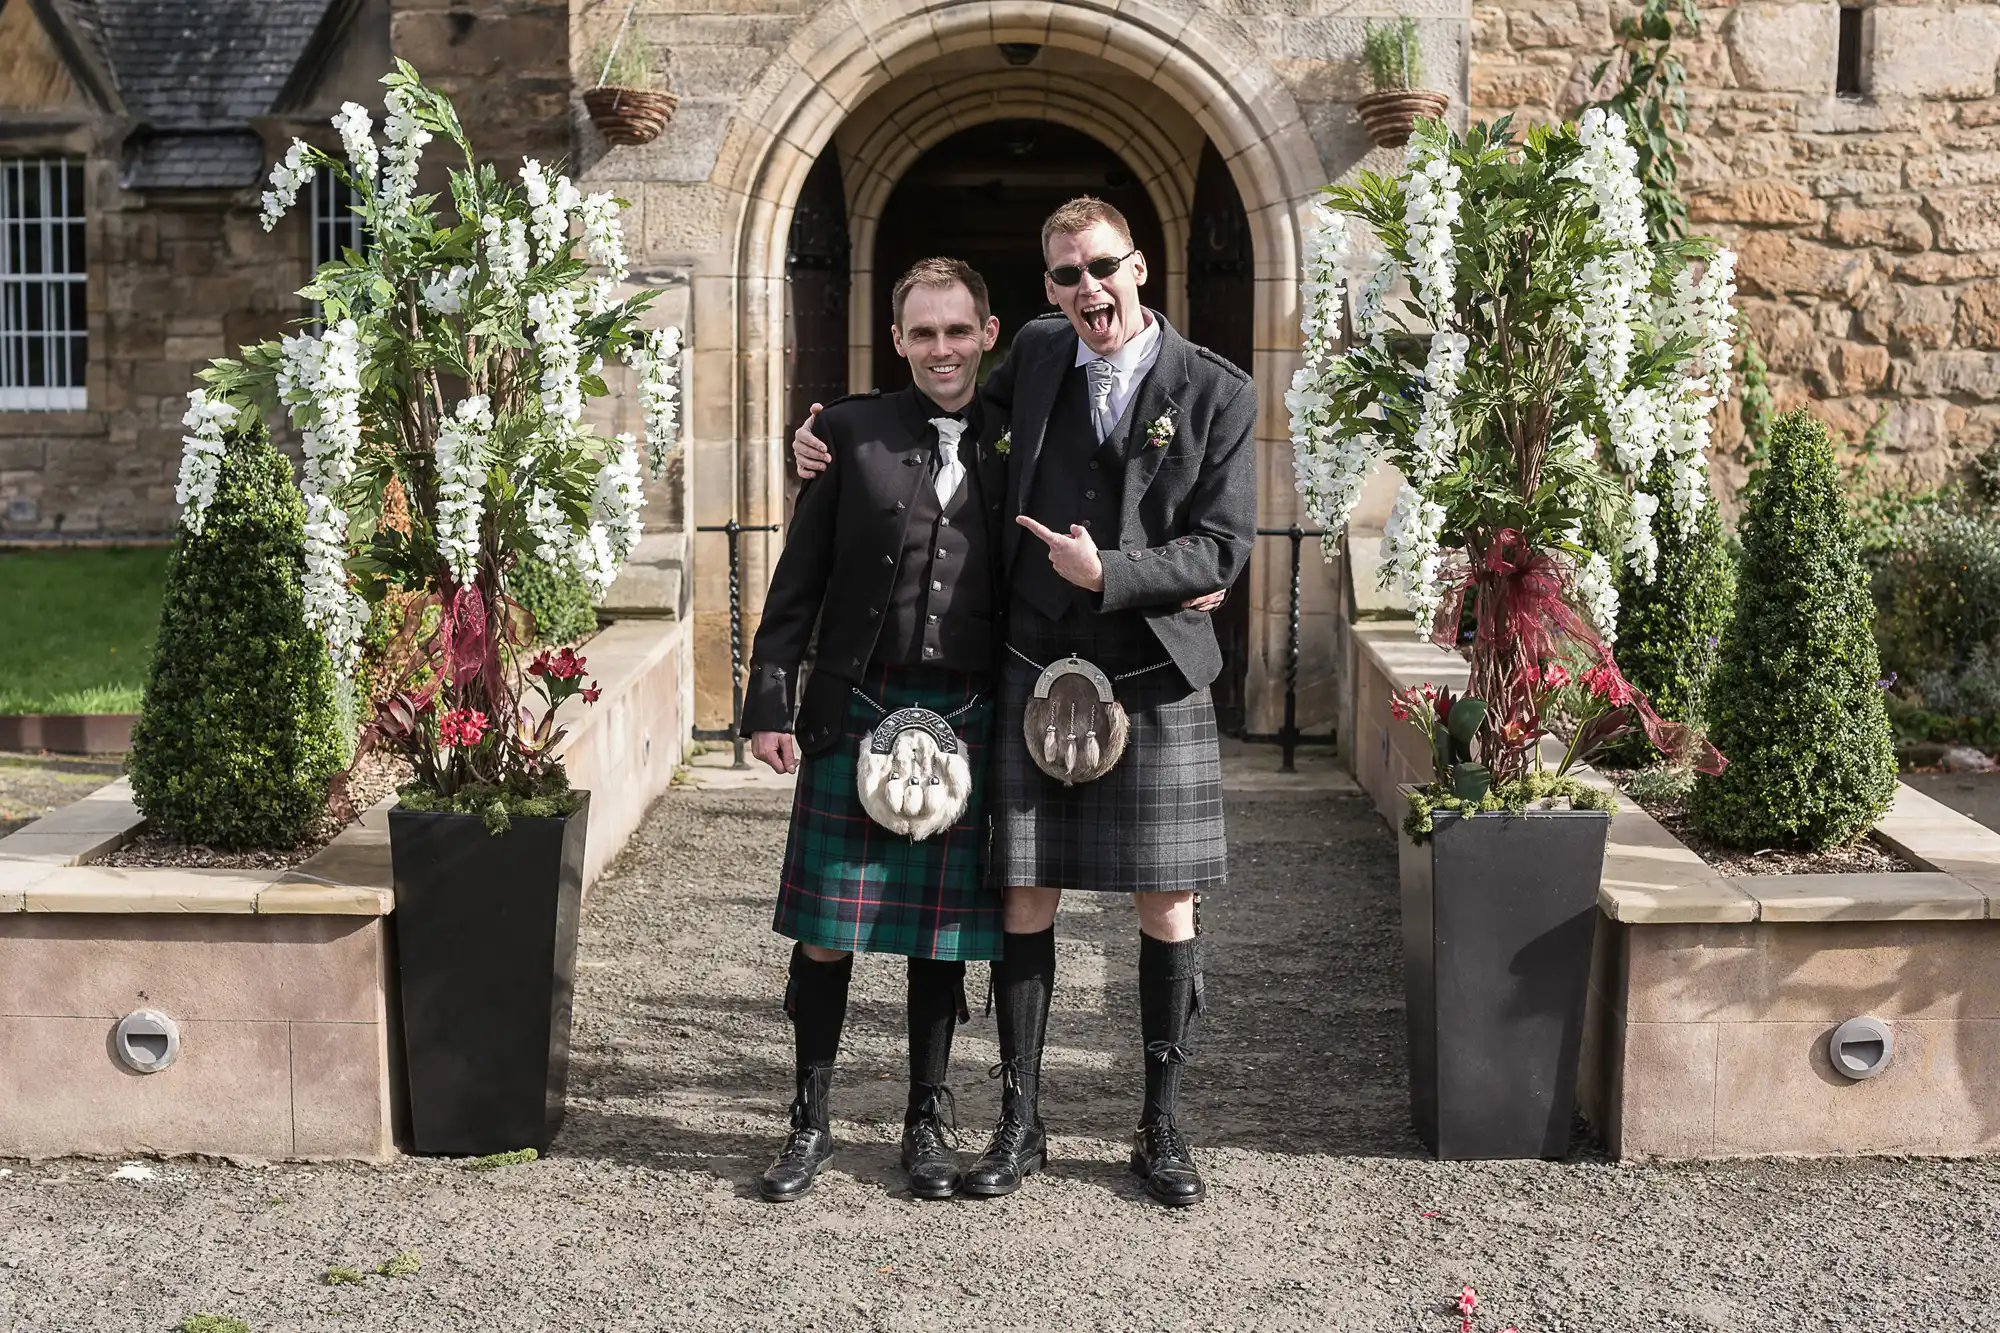 Two men in traditional scottish kilts smiling and standing arm in arm in front of a stone building with floral decorations.